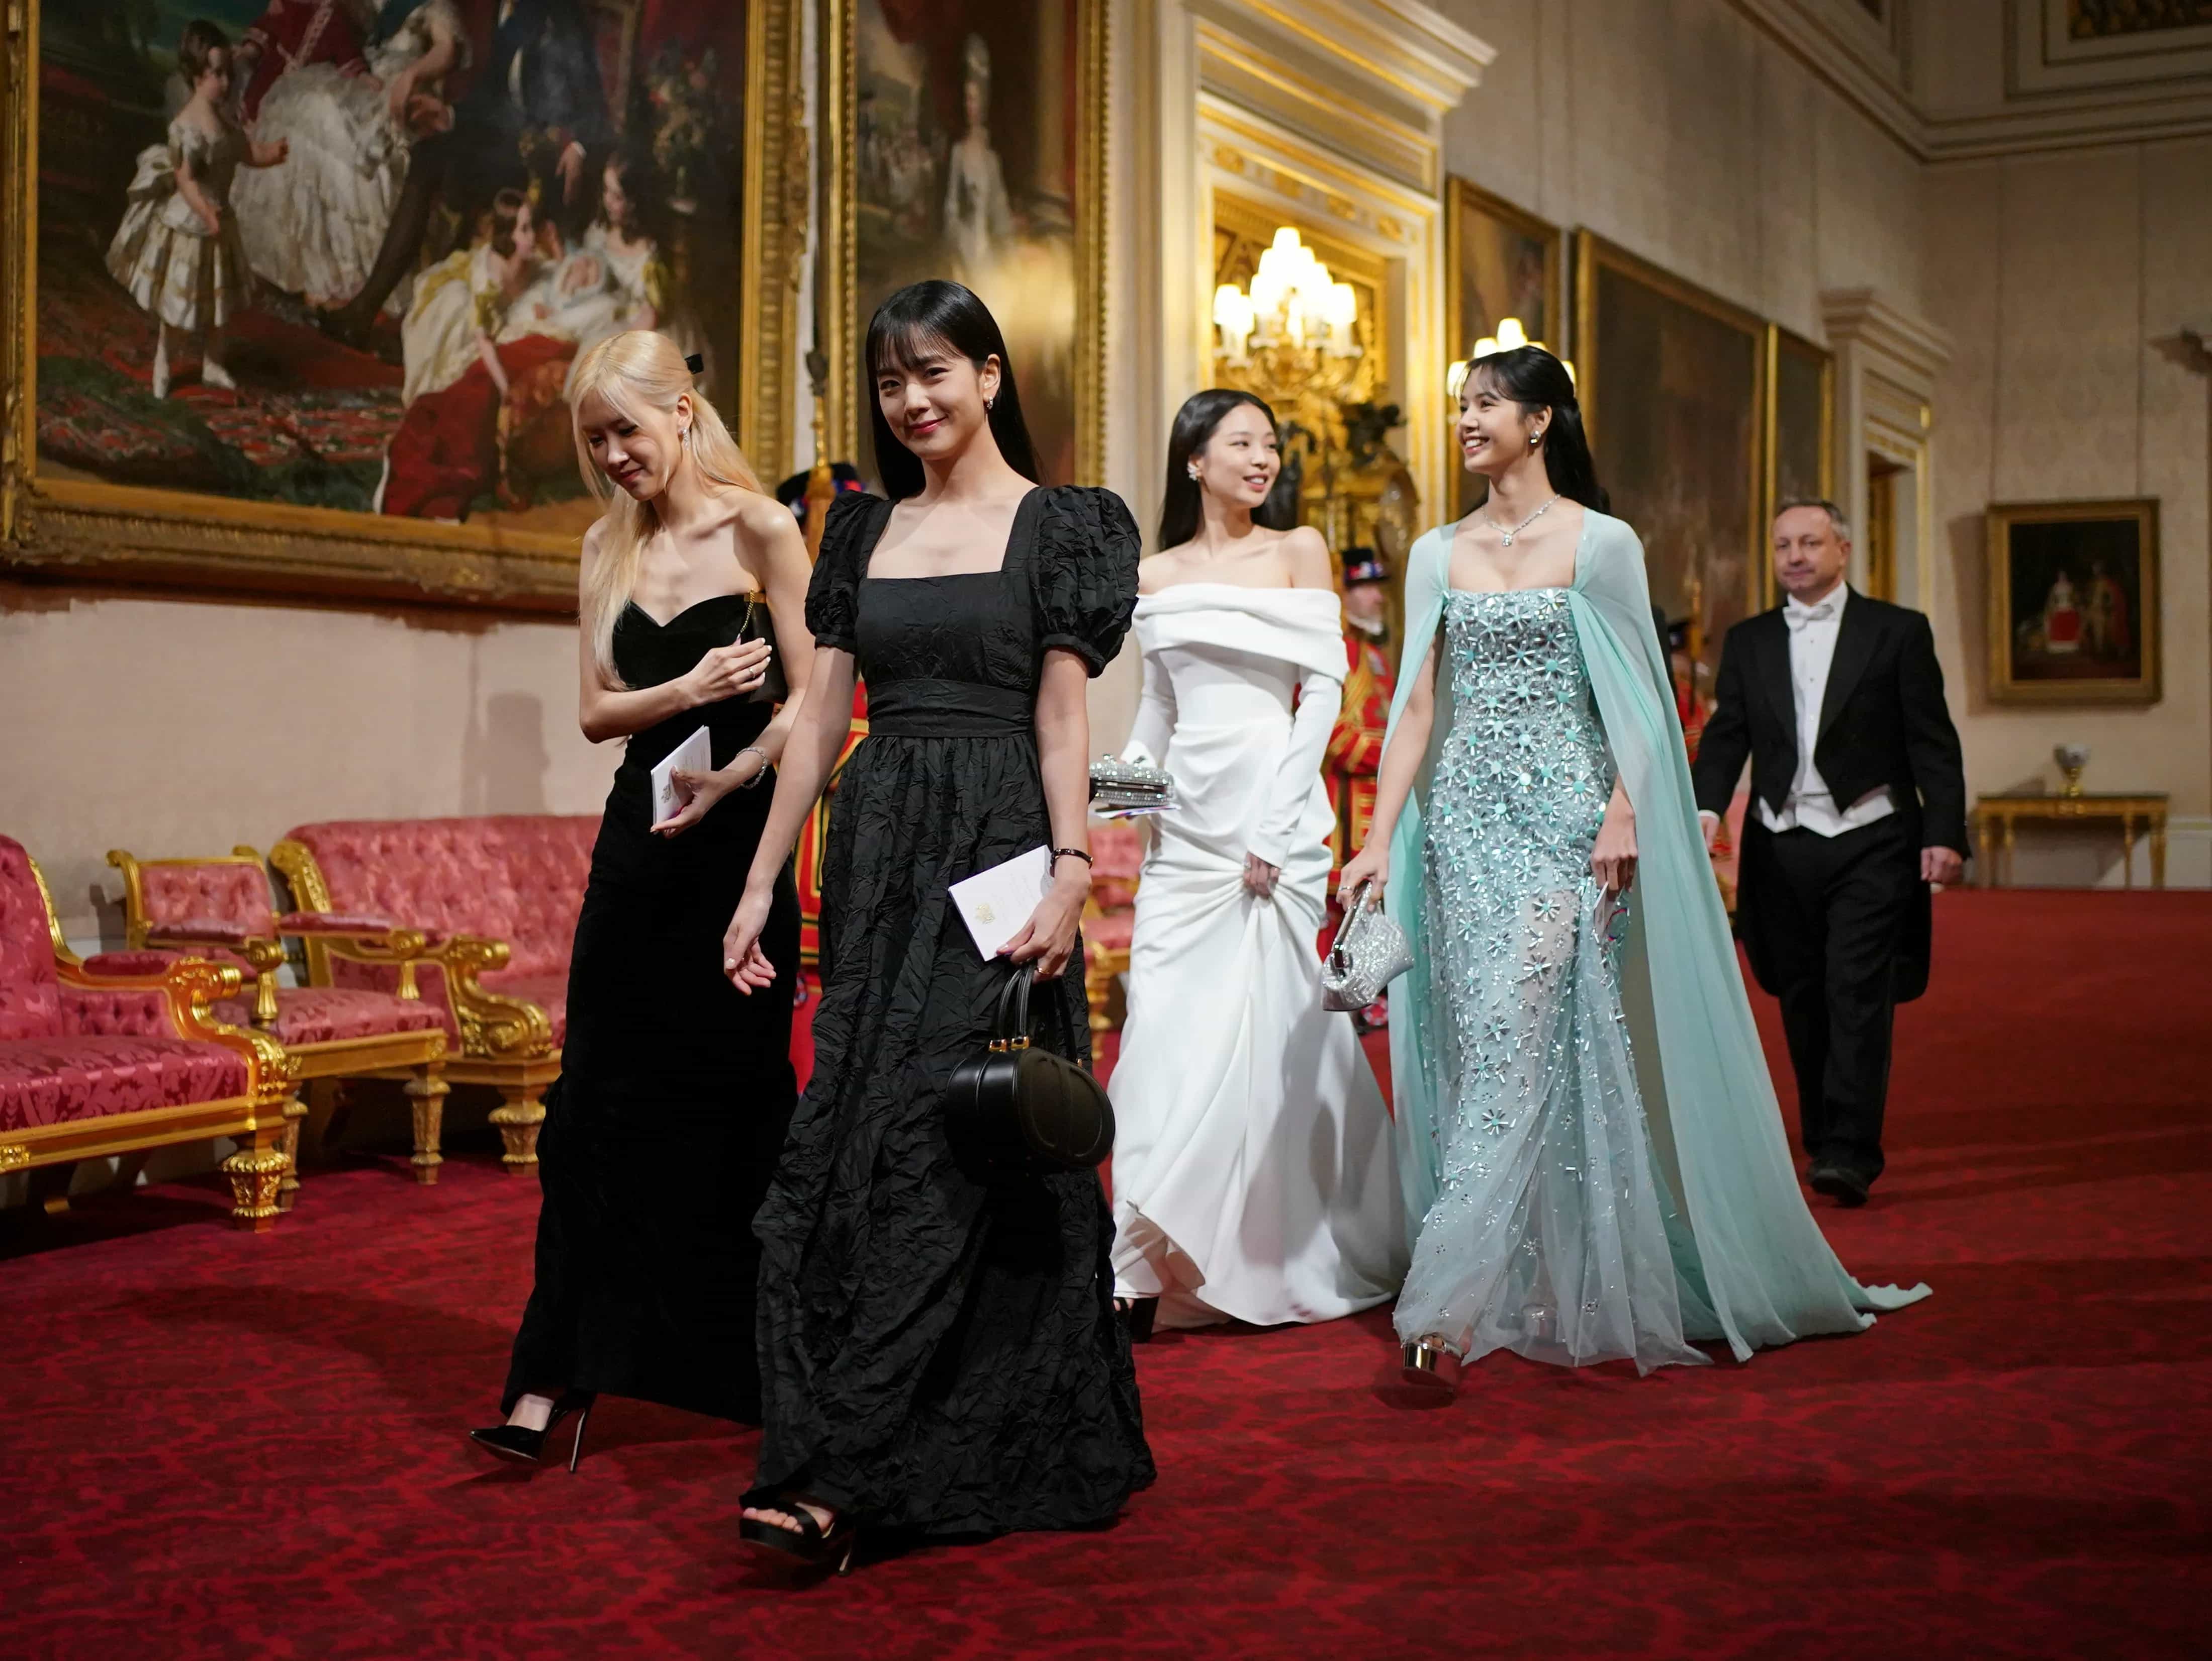 1 of 4 | South Korean girl band Blackpink ahead of the State Banquet, for the state visit to the UK by President of South Korea Yoon Suk Yeol and his wife Kim Keon Hee, at Buckingham Palace, London, Tuesday, Nov. 21, 2023. (Yui Mok/Pool Photo via AP)